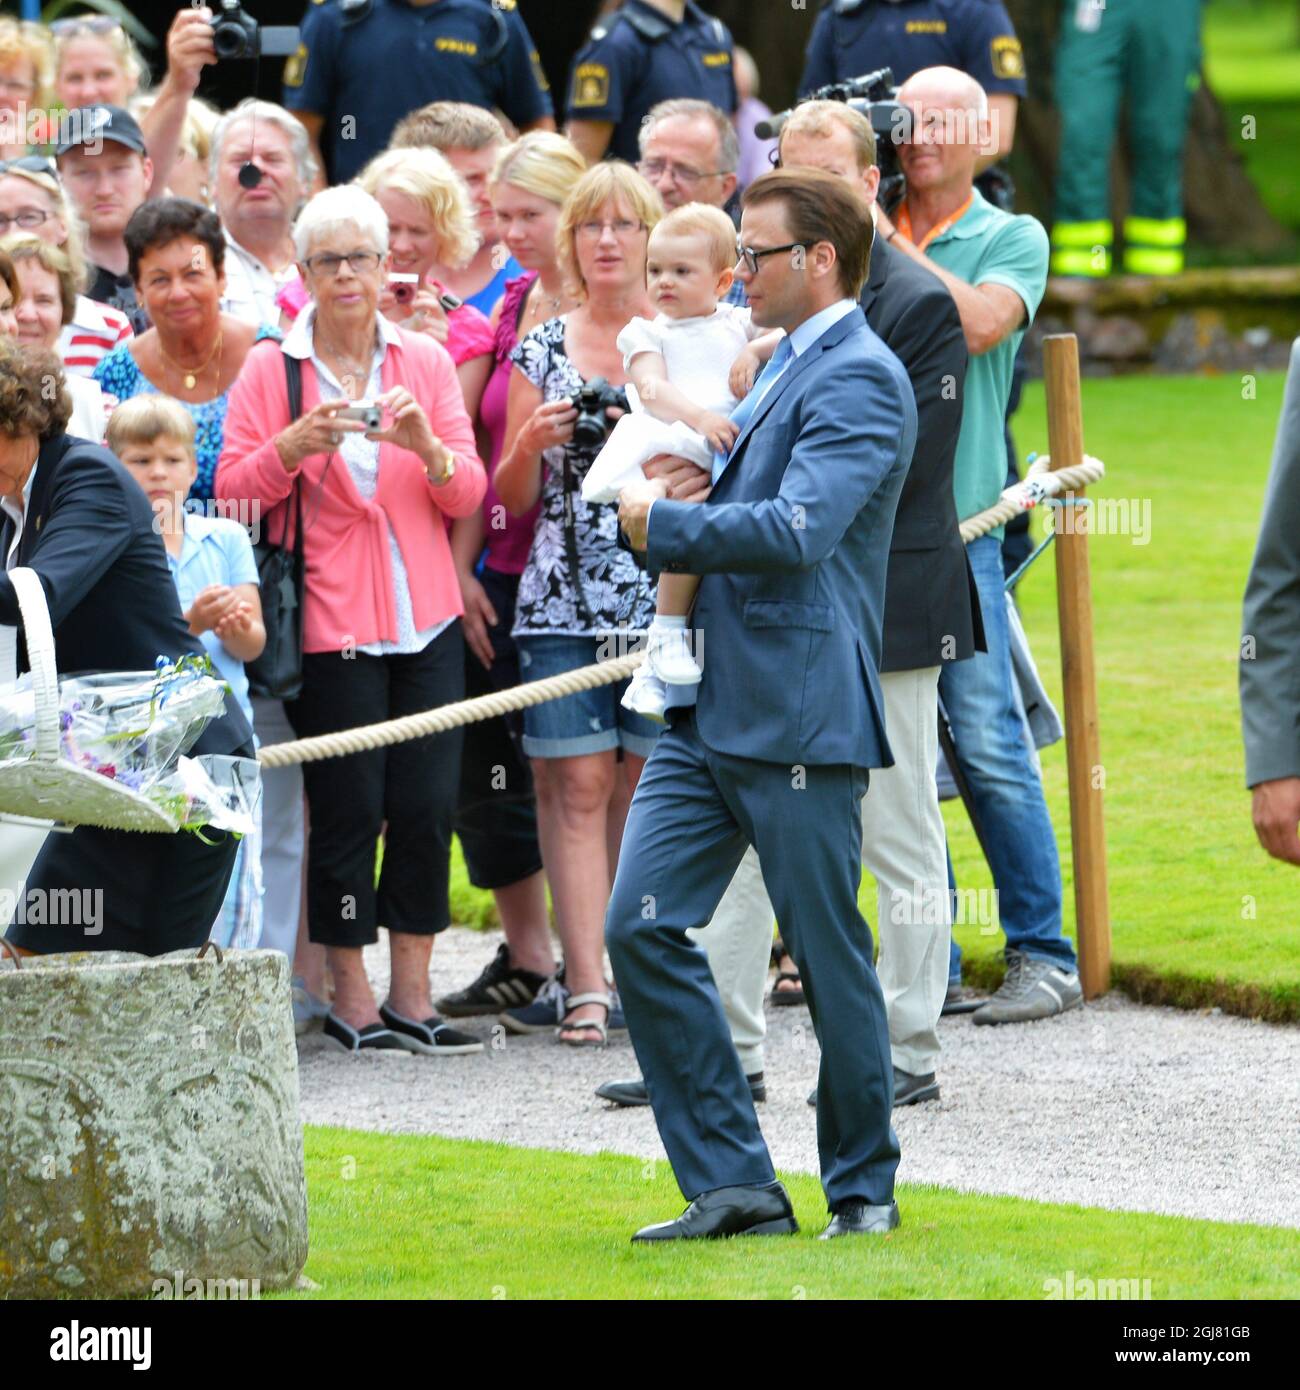 BORGHOLM 20130714 Swedish Prince Daniel with his daugter Princess Estelle, at the courtyard of the royal family's summer residence Solliden, on the island of Oeland, Sweden, on July 14, 2012, during the celebrations of Crown Princess Victorias 36th birthday. Photo: Jonas Ekstromer / SCANPIX / code 610030  Stock Photo